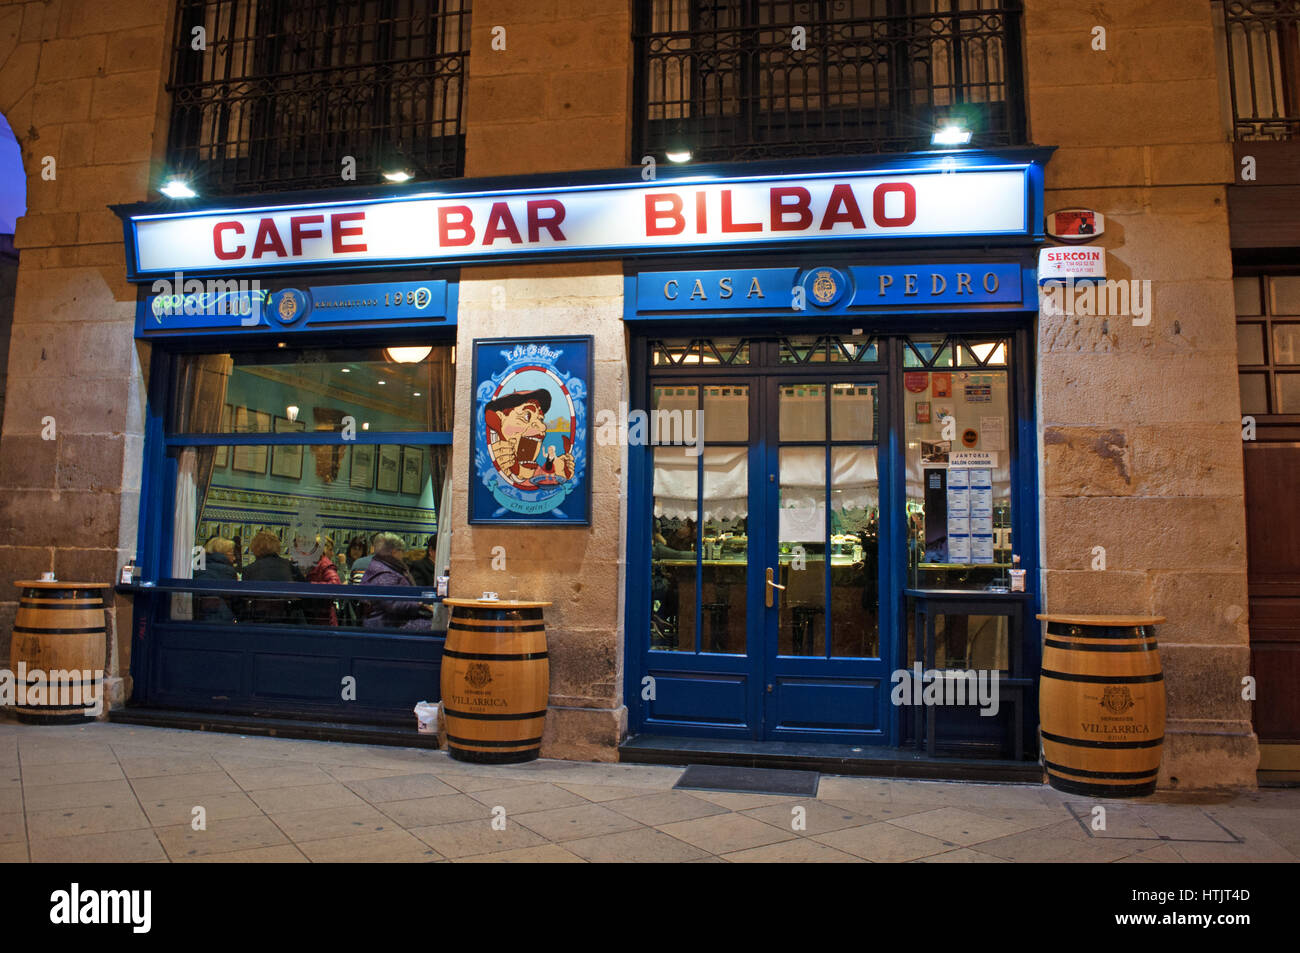 The Cafe Bar Bilbao, one of the most ancient and typical taverns under the arches of Plaza Nueva, the most famous square of the Old City of Bilbao Stock Photo